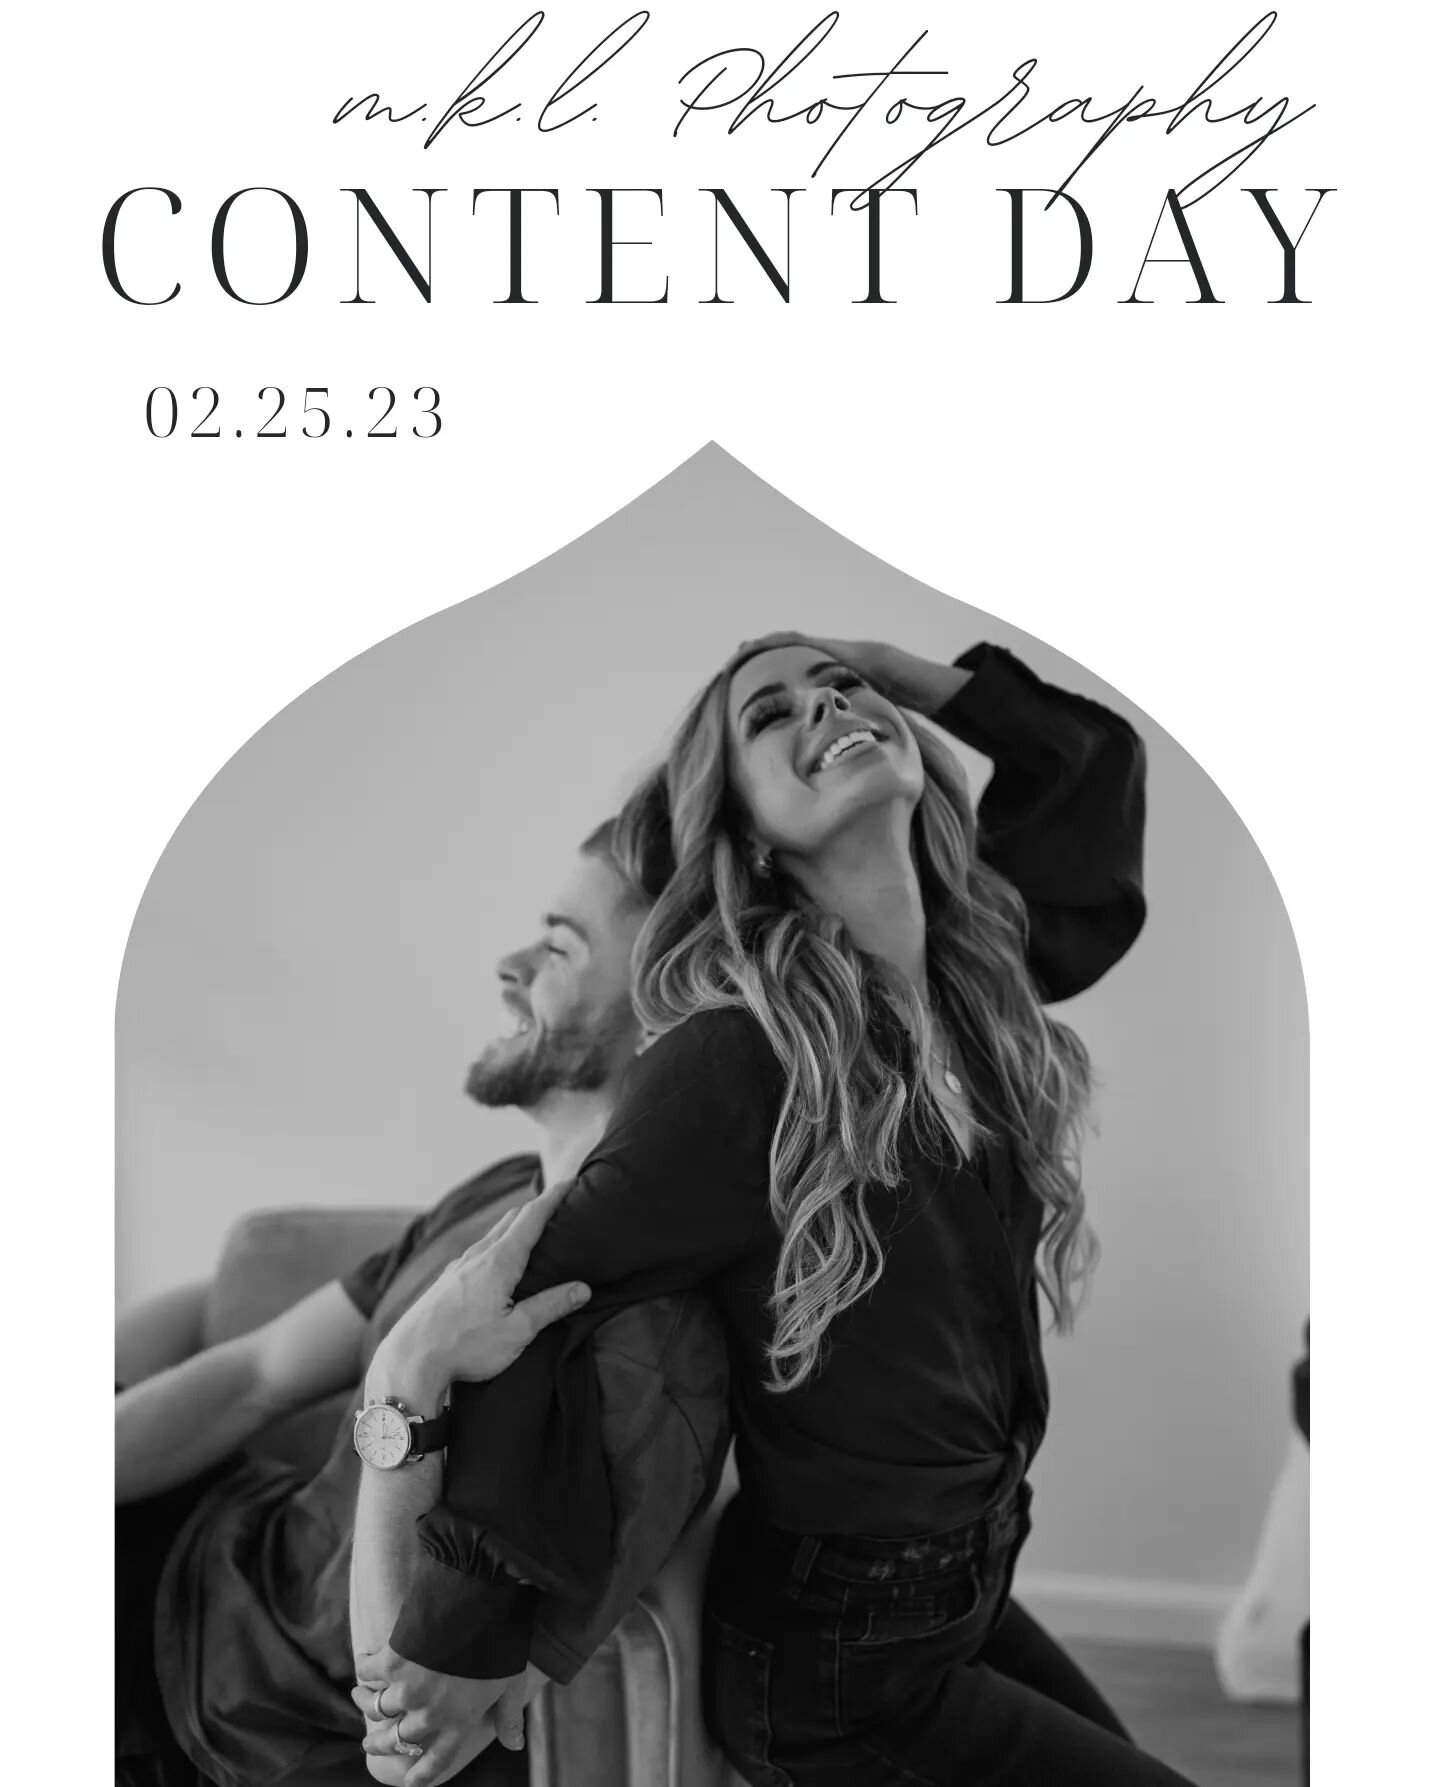 Save the date 

02. 25. 23

*Attention*
Photographers &amp; videogroahers
We're Stoked to be announcing  some more details SOON about our very own content day at the STUDIO!

Stay tuned!